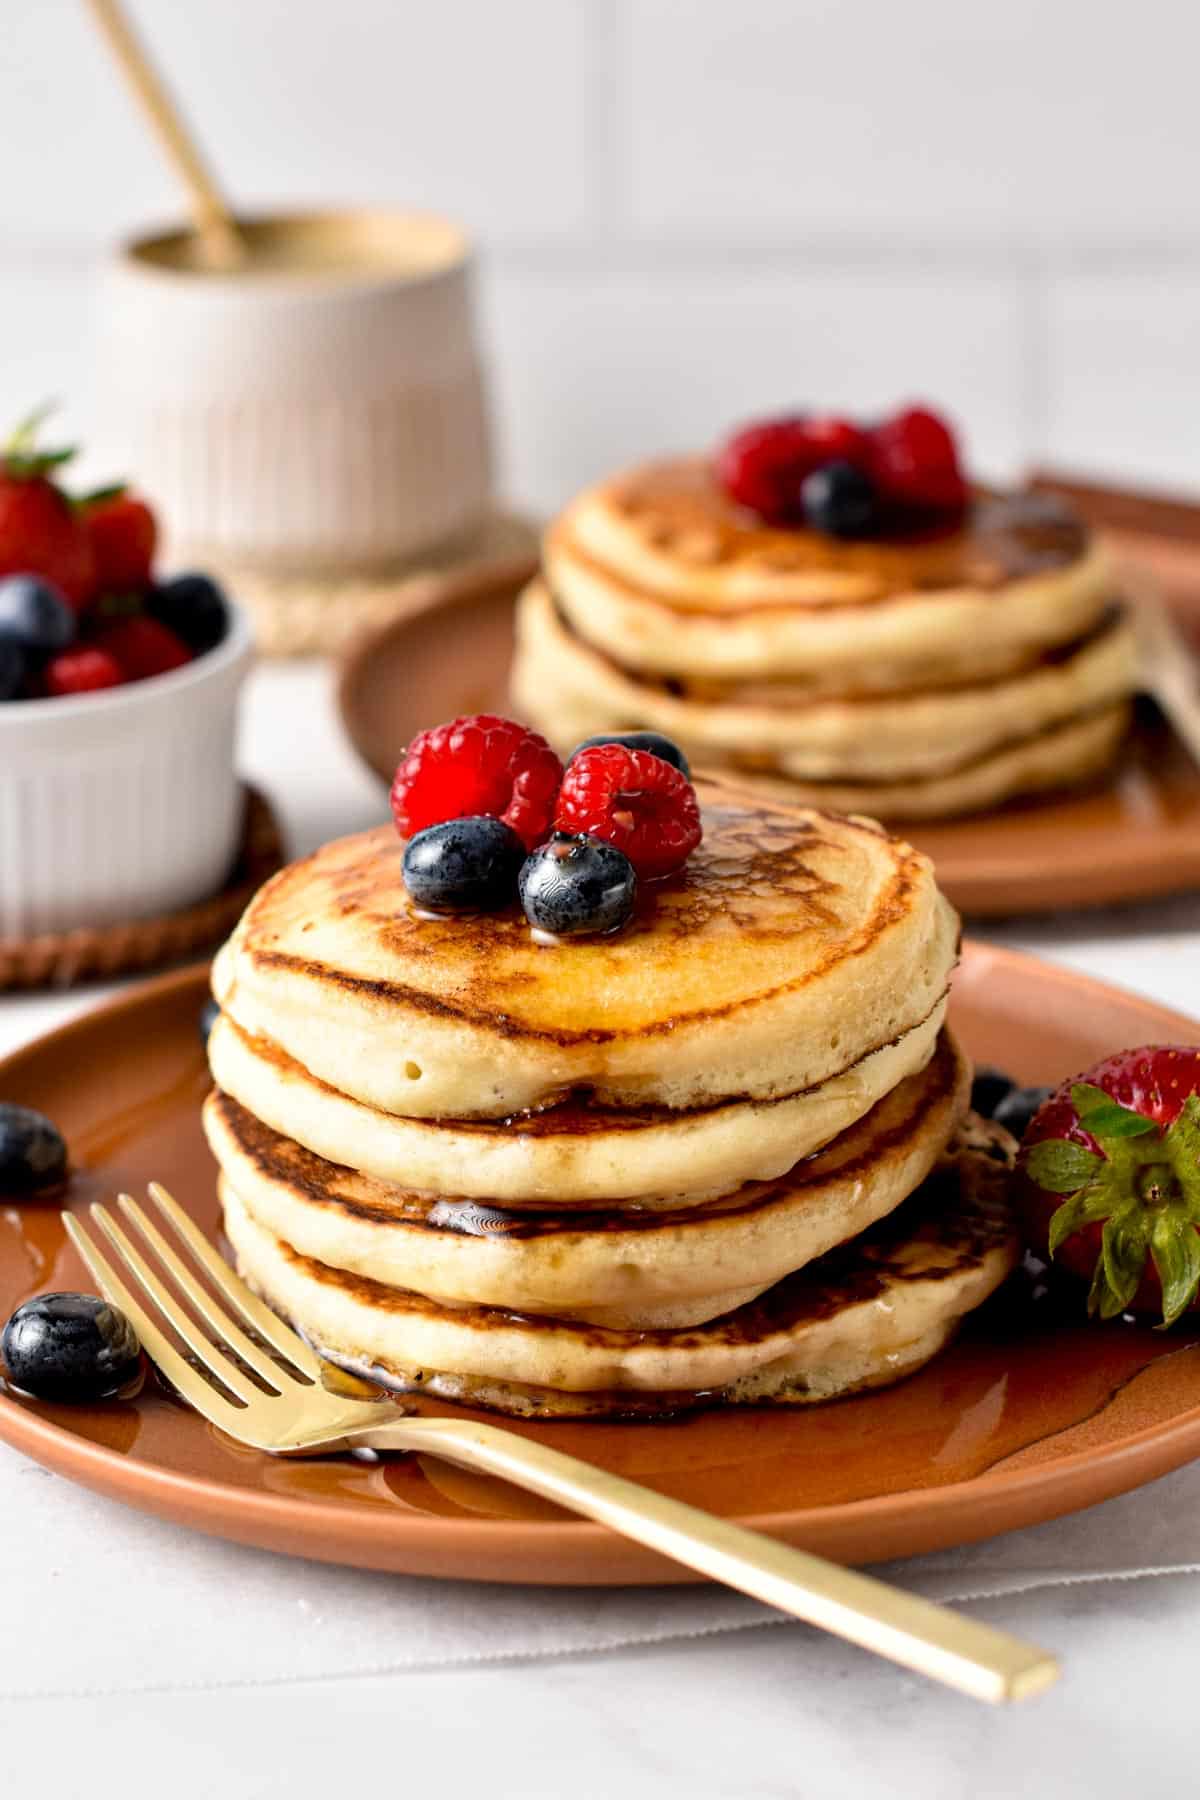 These eggless pancakes are easy fluffy pancakes perfect for an egg-free breakfast, Plus, these pancakes are also dairy-free and therefore vegan friendly so you can share them with all the family.